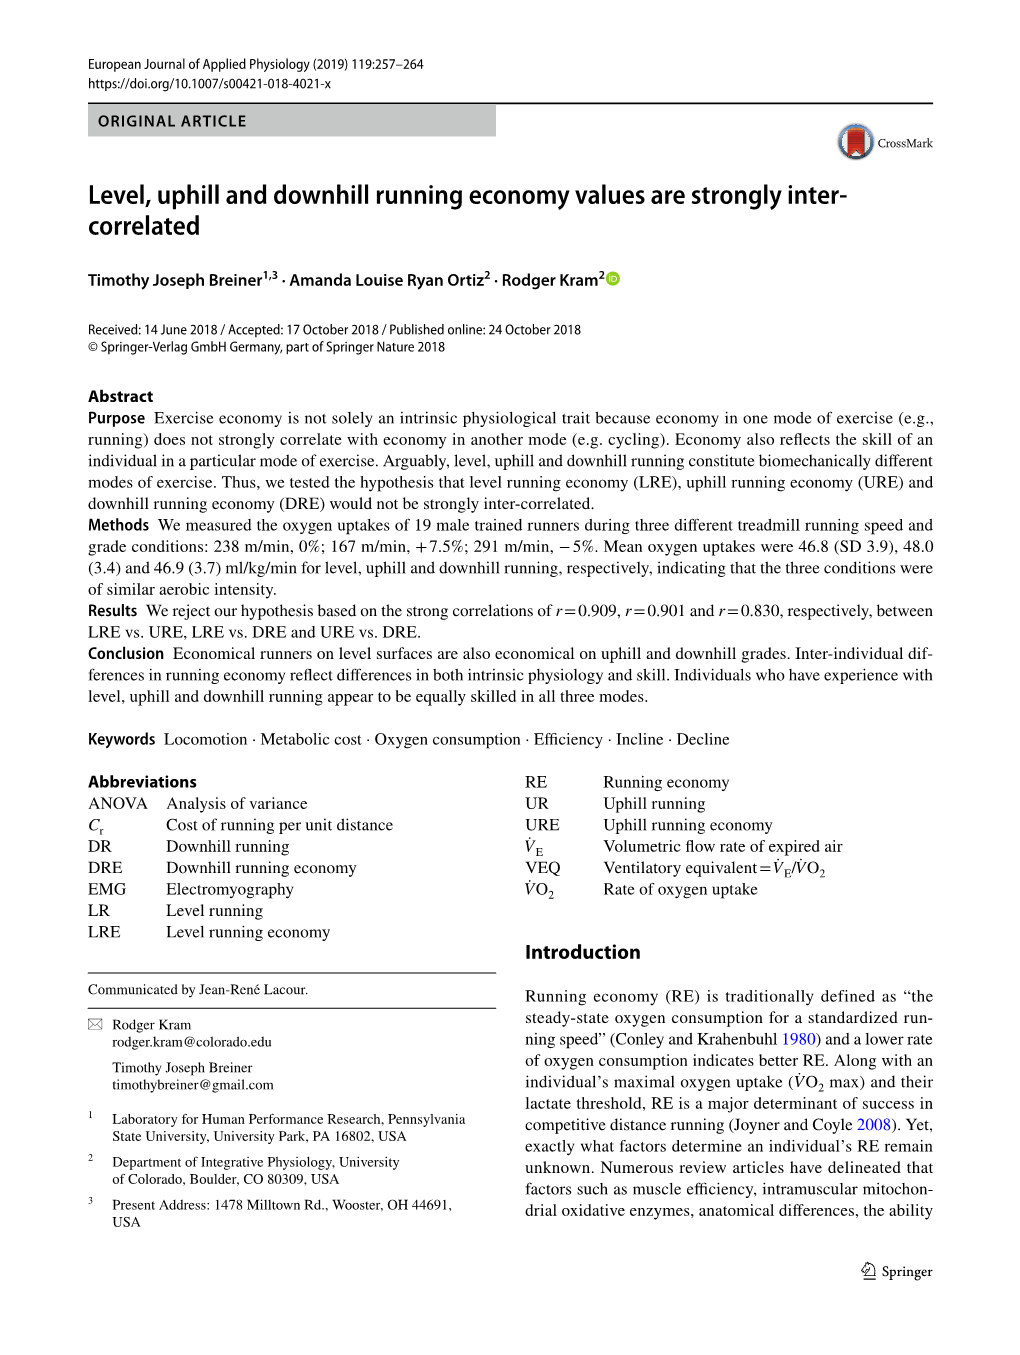 Level, Uphill and Downhill Running Economy Values Are Strongly Inter- Correlated